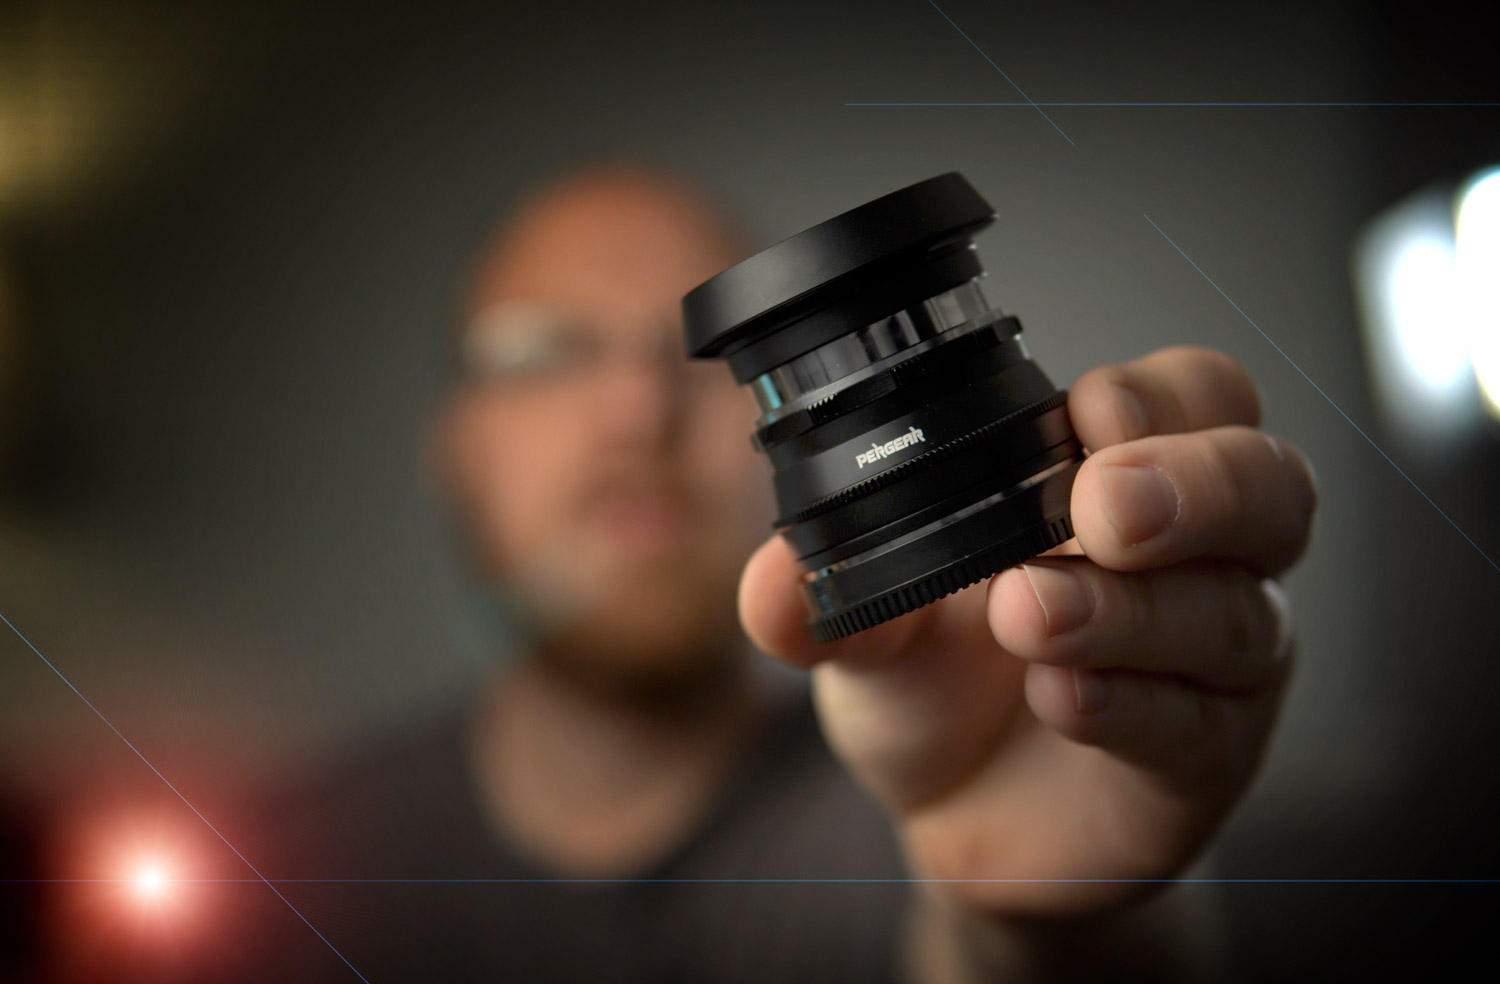 Pergear 25mm f/1.8 Lens Review